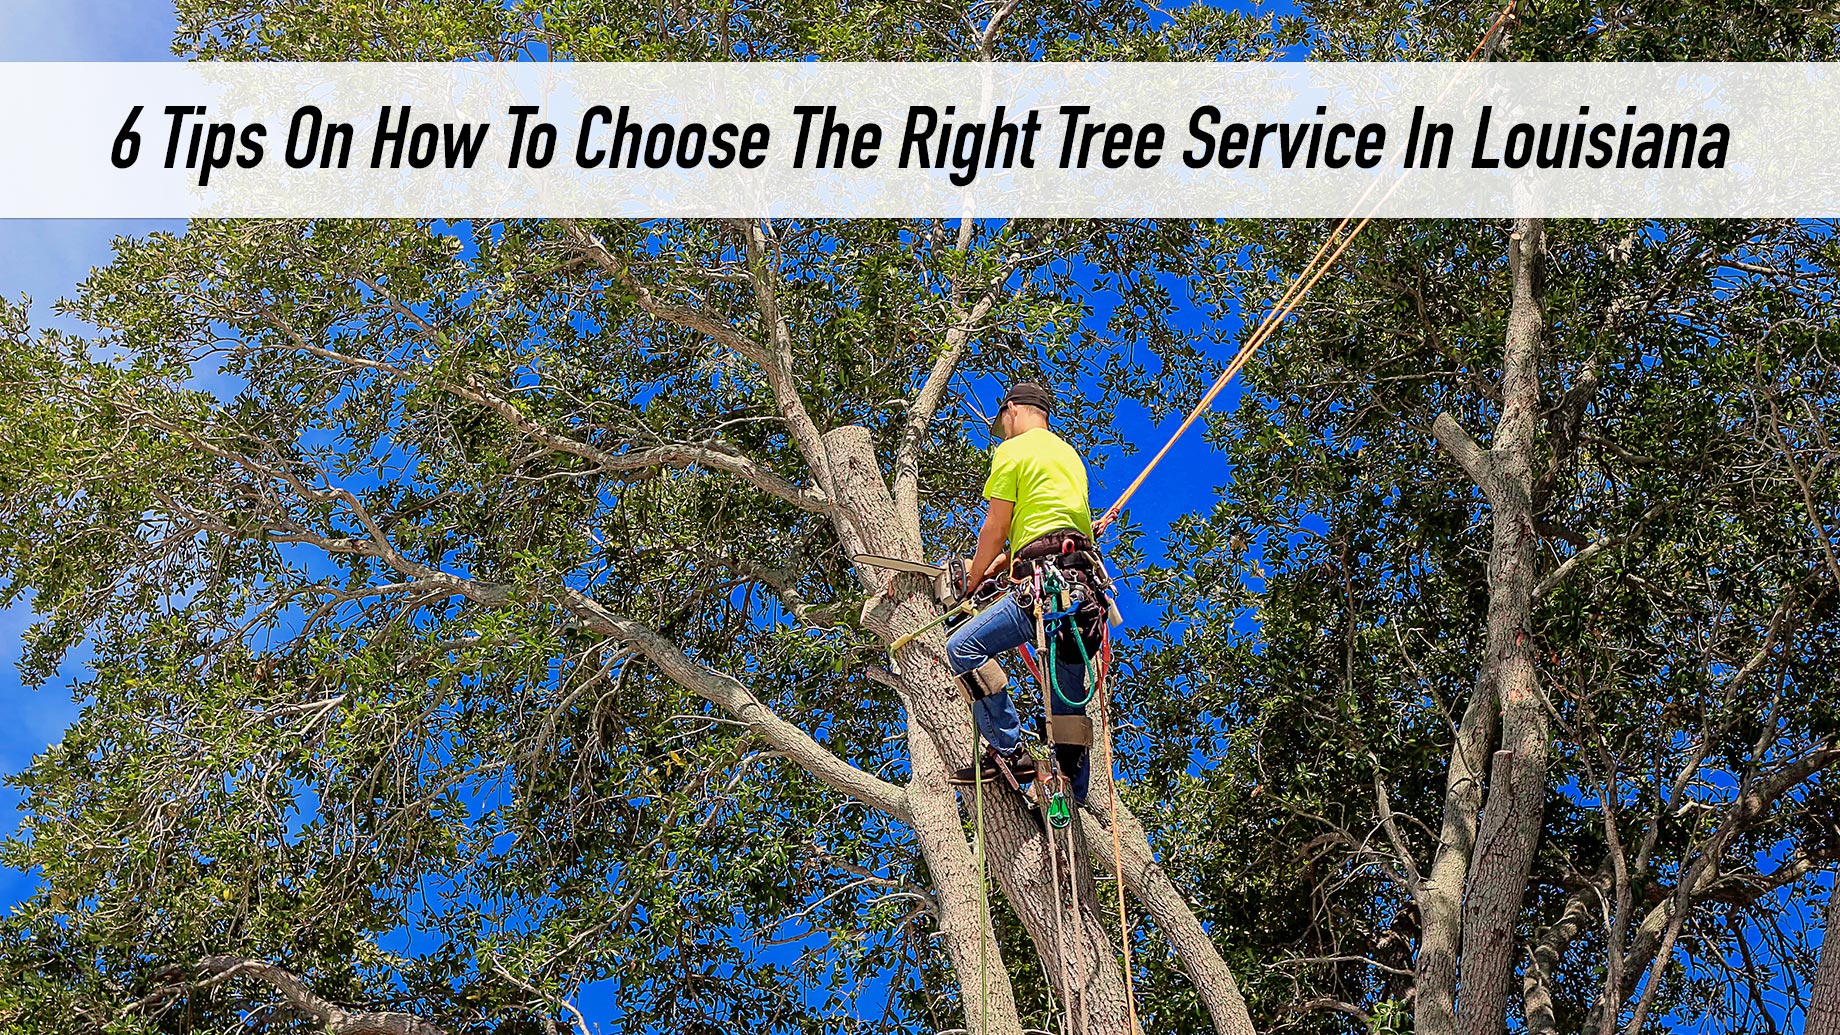 6 Tips On How To Choose The Right Tree Service In Louisiana